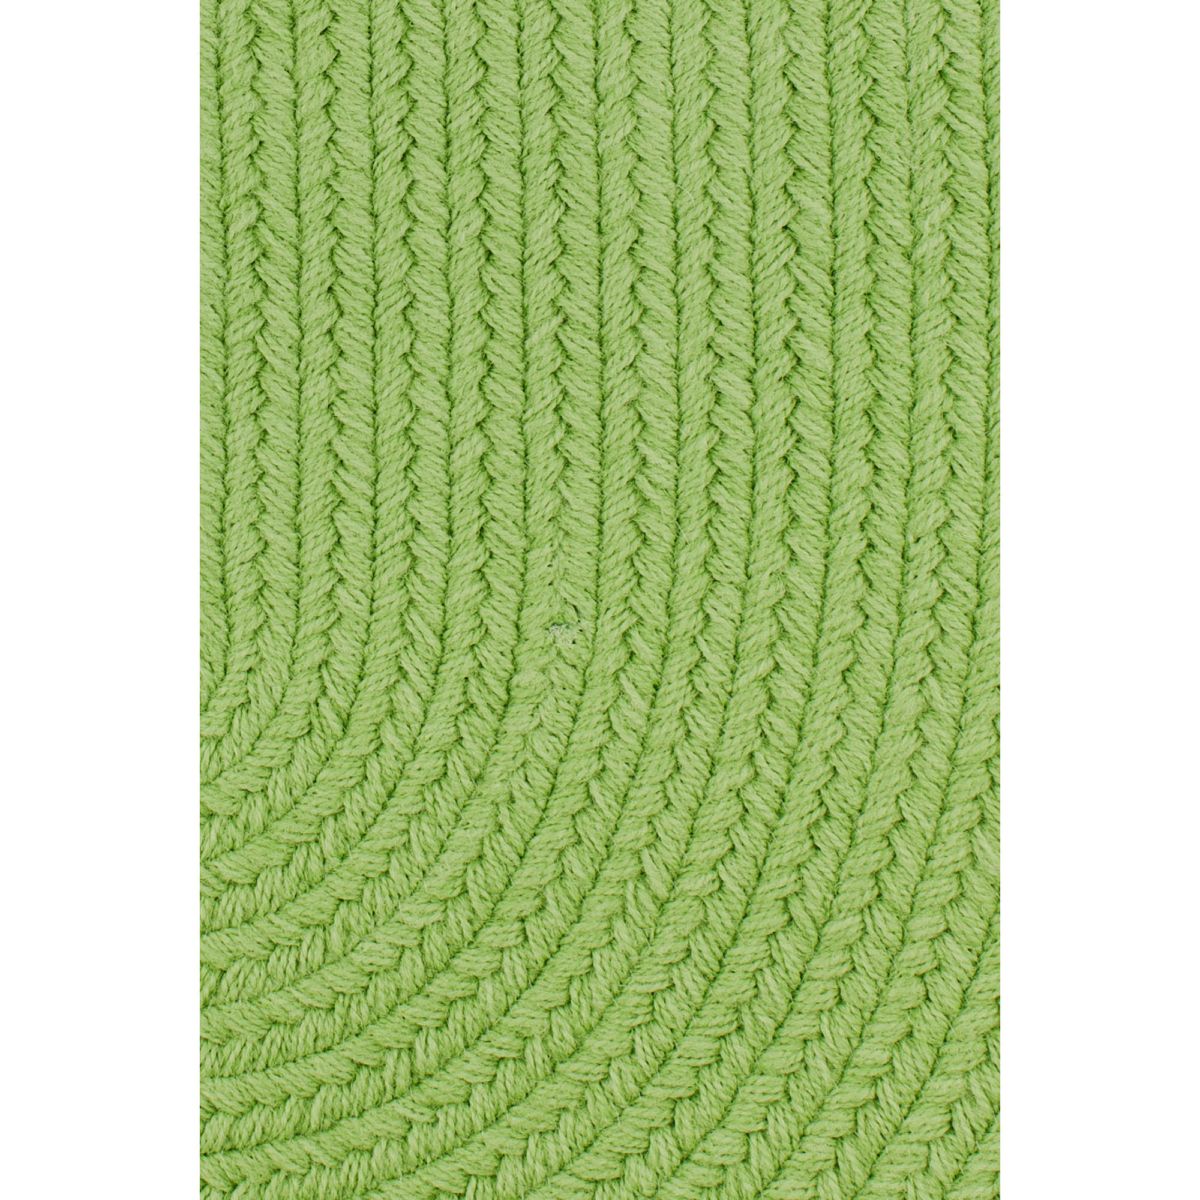 Maui Braided Ultra Durable Outdoor Rug #color_key lime green